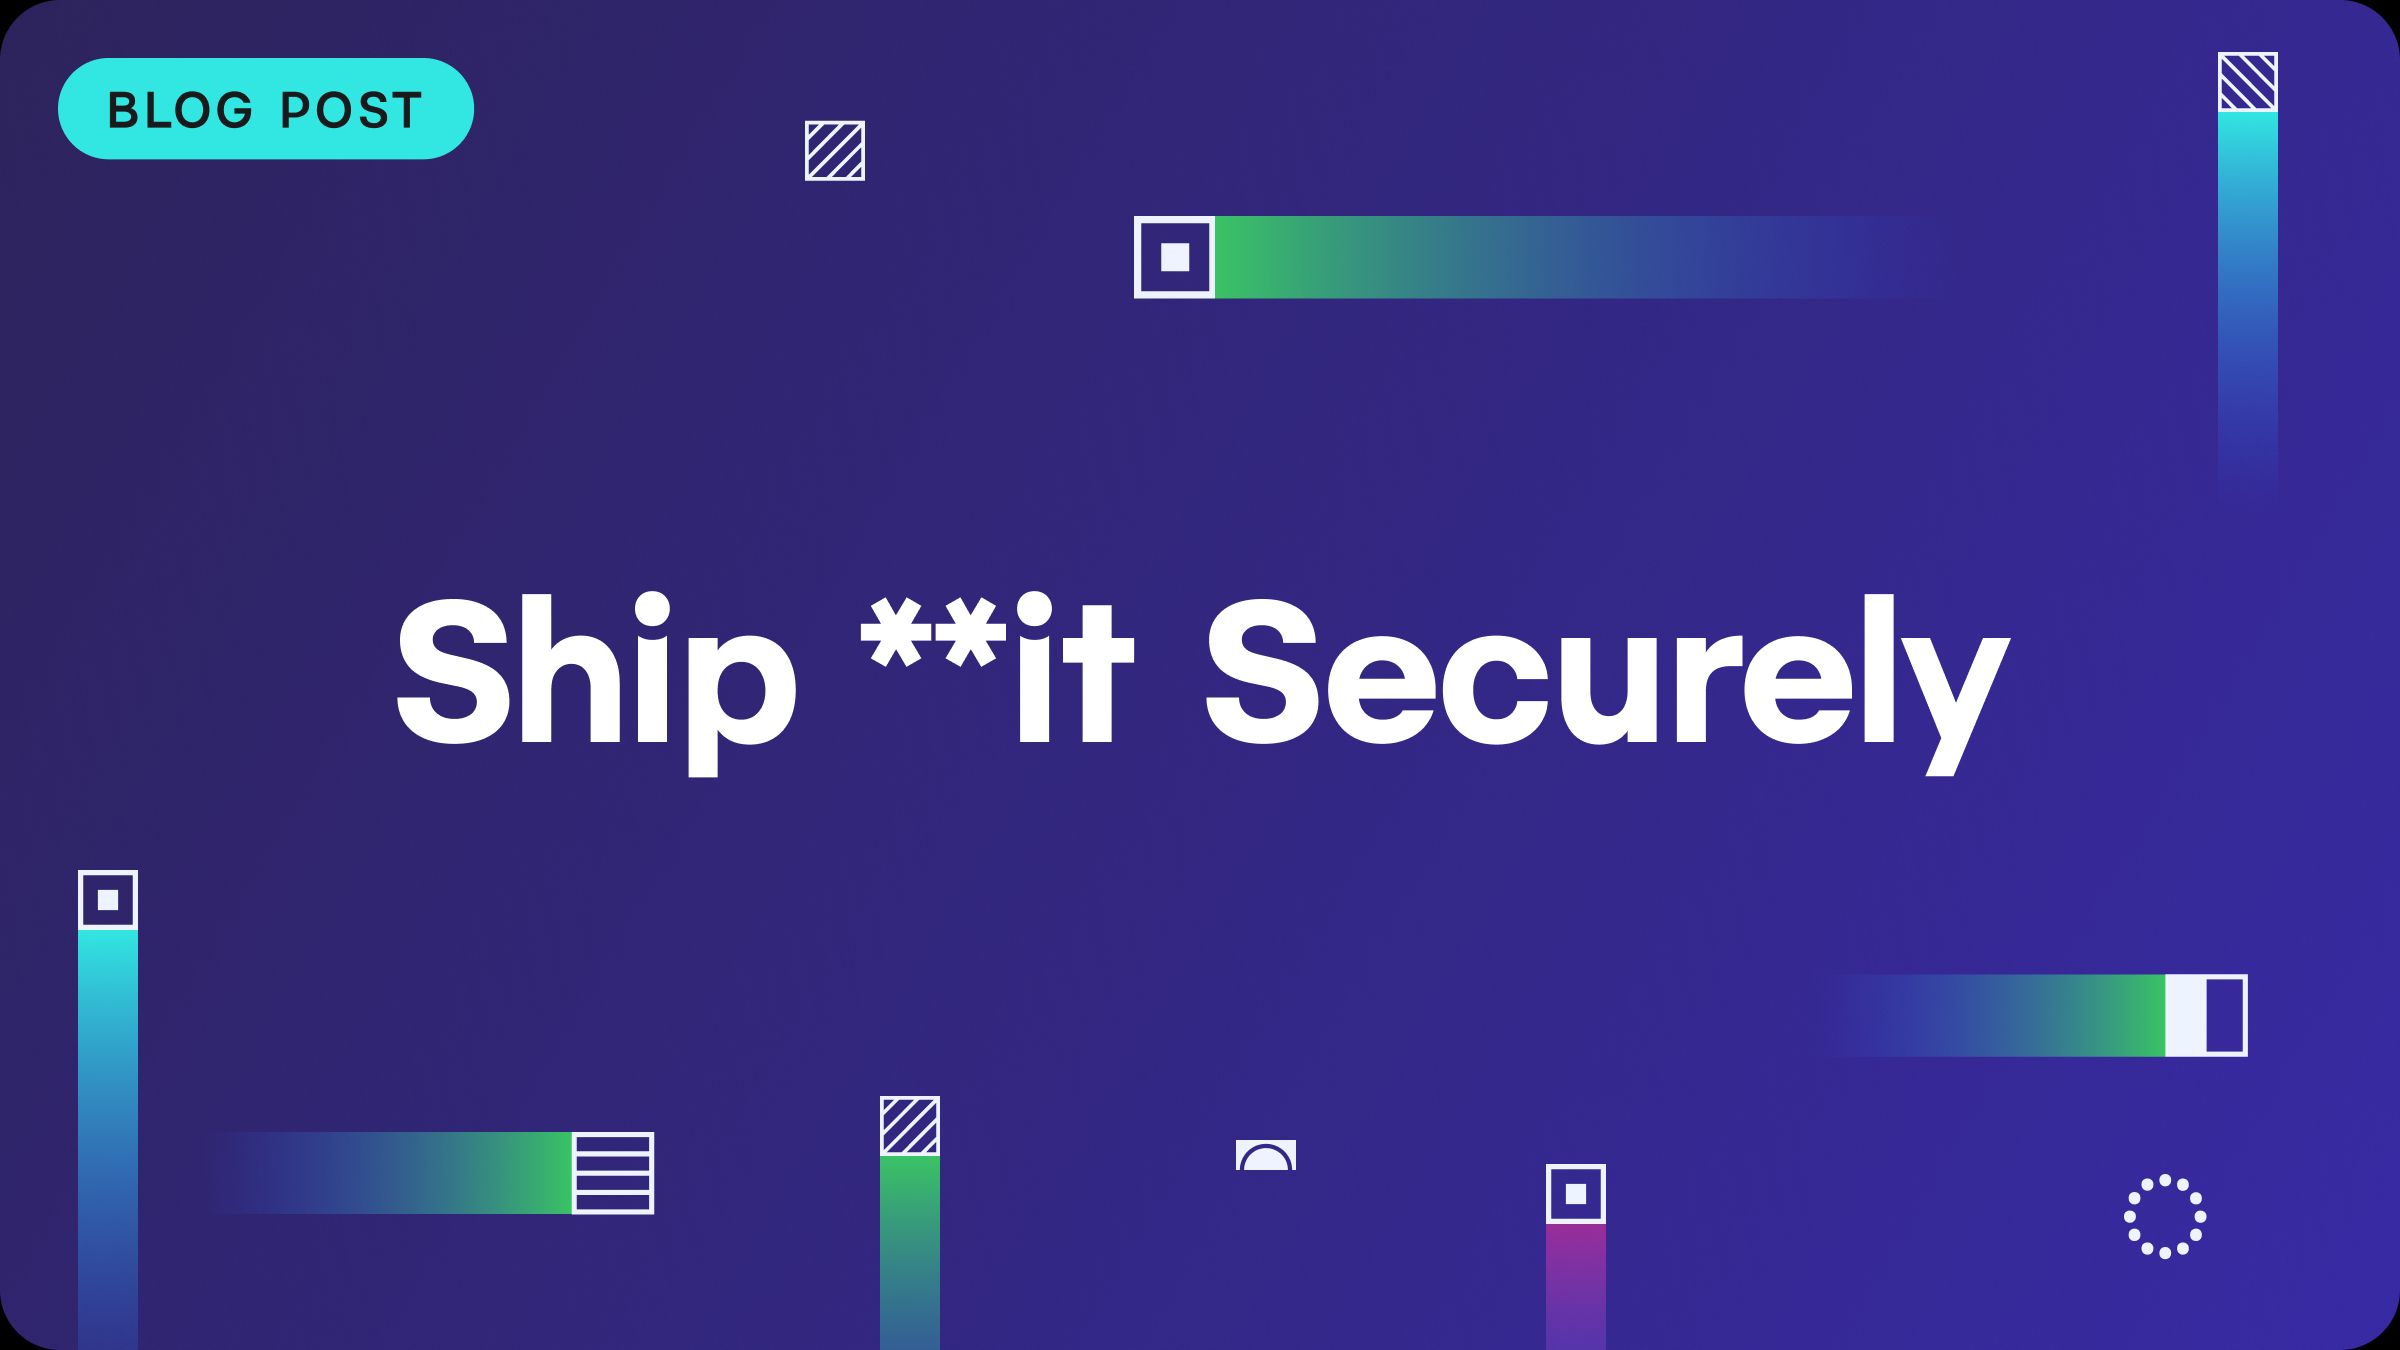 Ship it securely